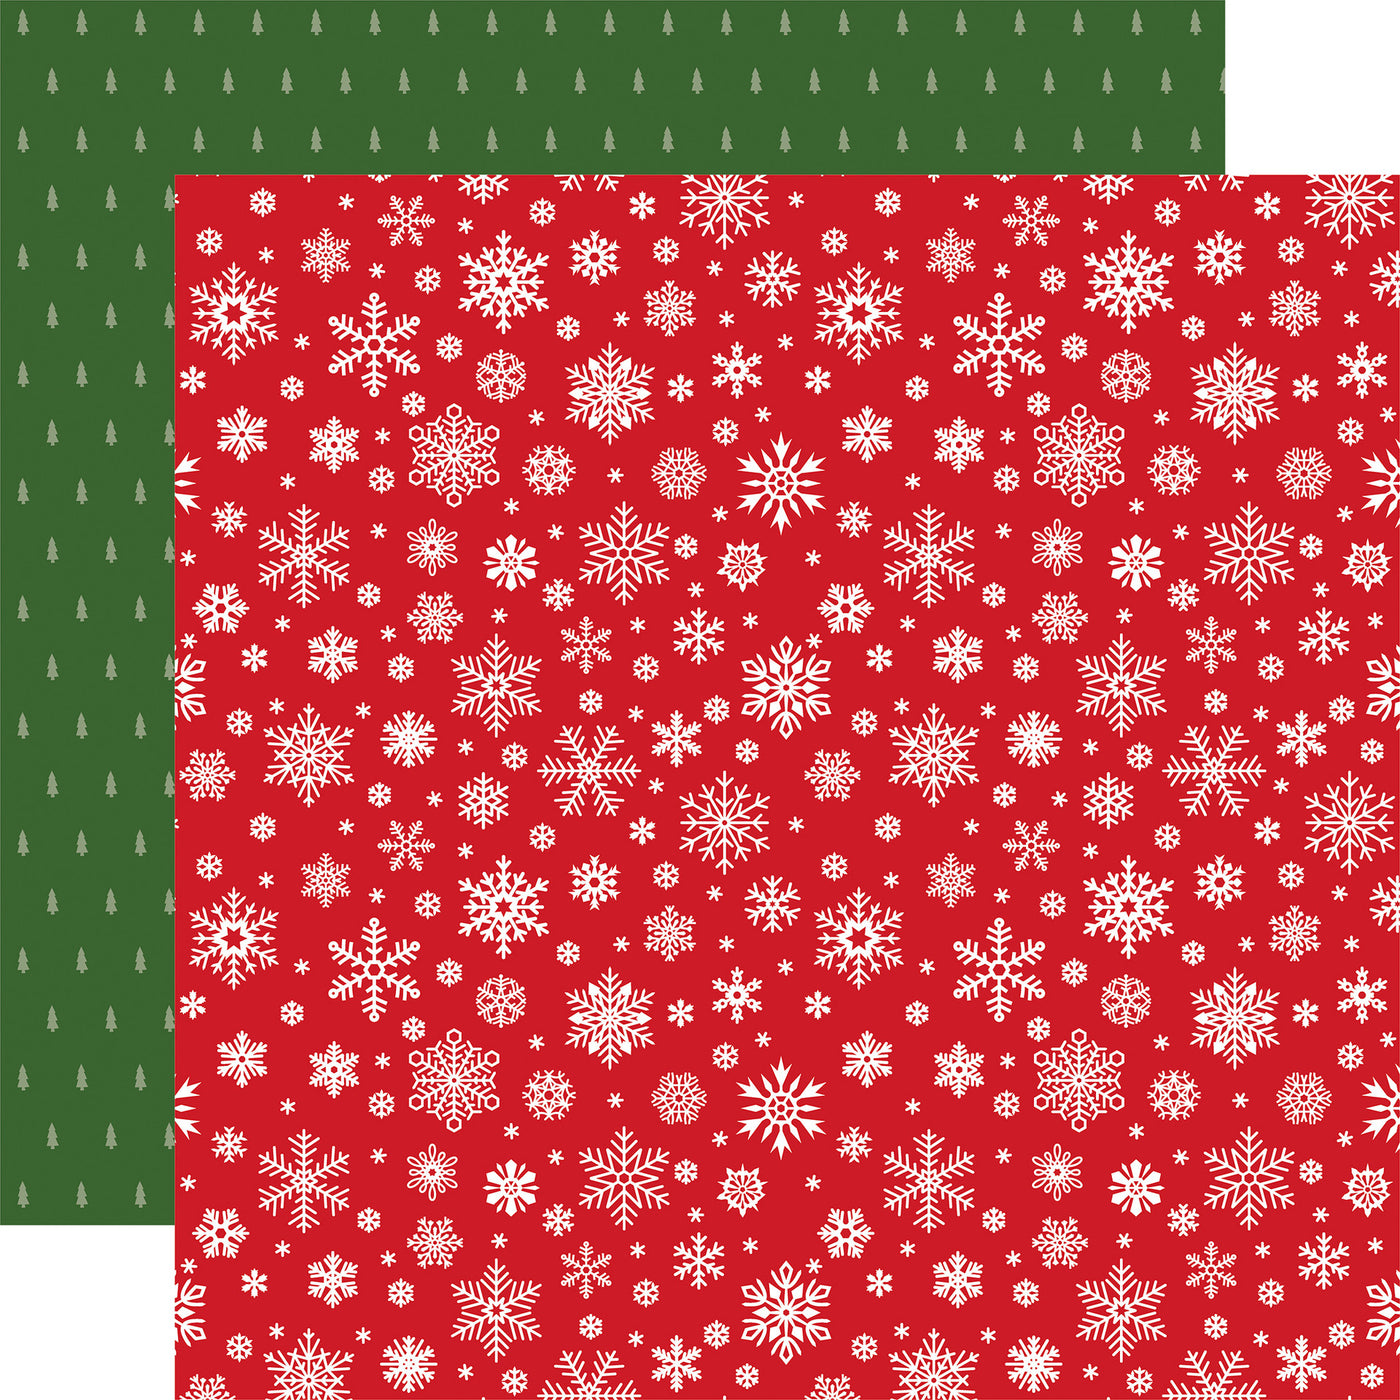 SILENT SNOWFALL - 12x12 Double-Sided Patterned Paper - Echo Park